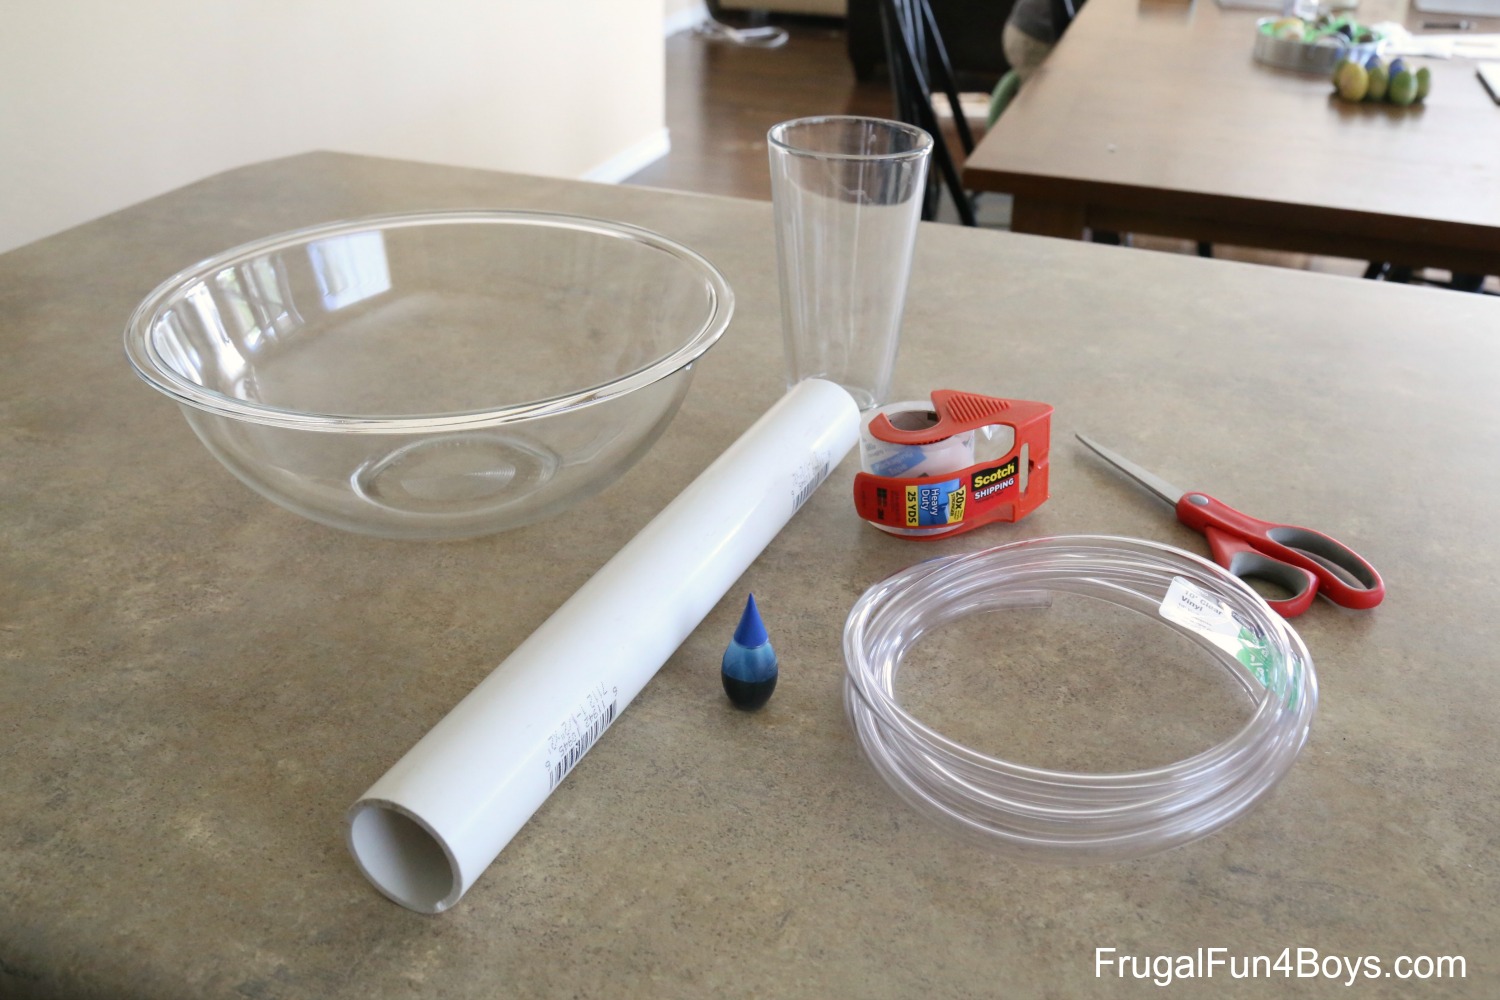 Simple Machines Science Lesson: Build an Archimedes' Screw